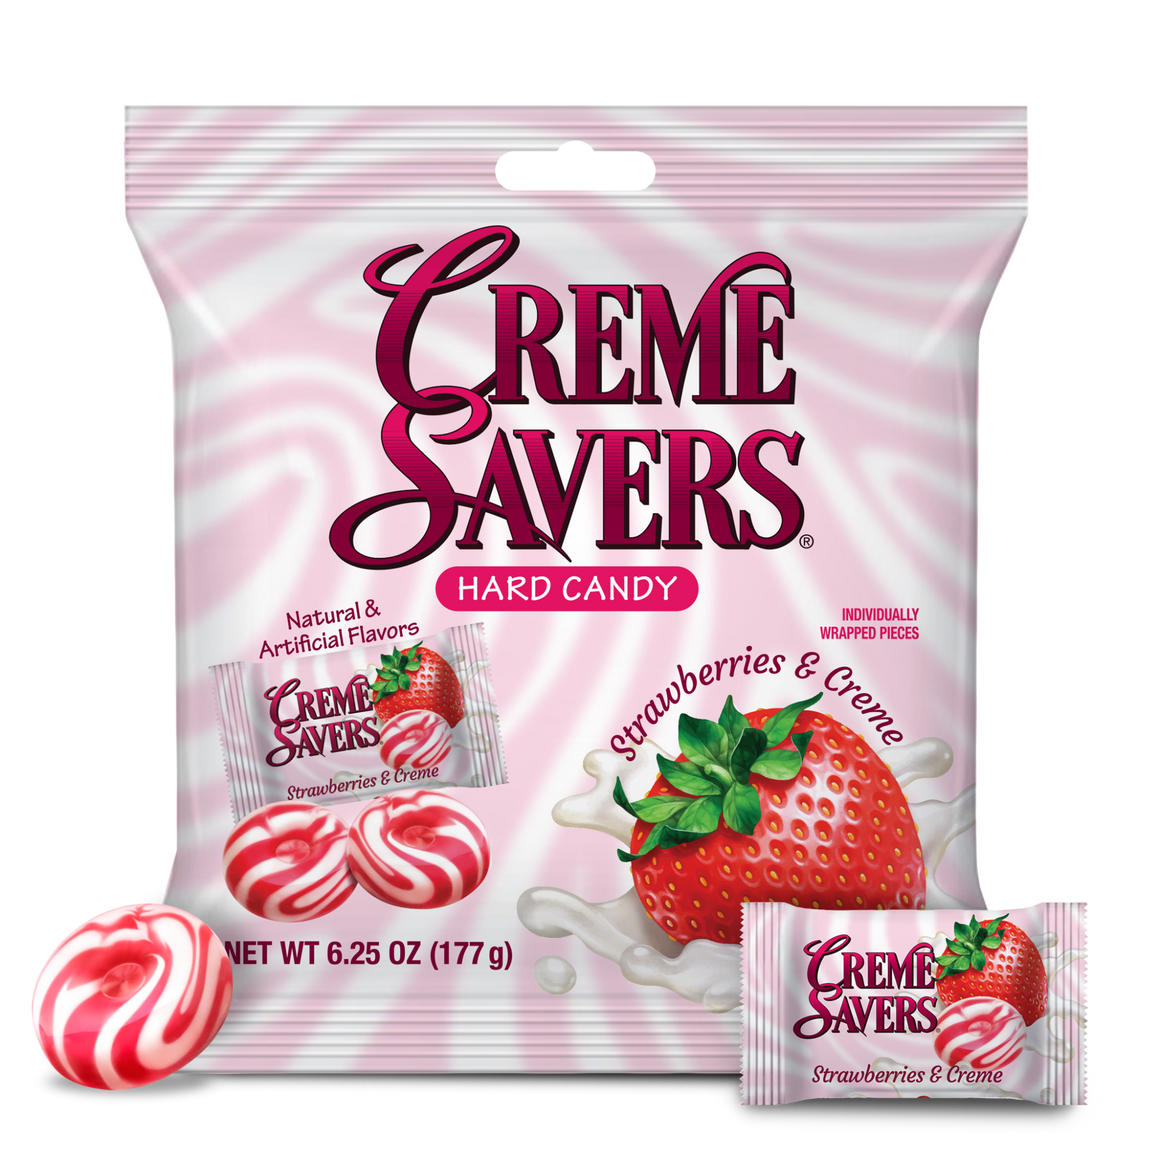 All City Candy Creme Savers Strawberries & Creme 6.25 oz. Bag Hard Iconic Candy For fresh candy and great service, visit www.allcitycandy.com